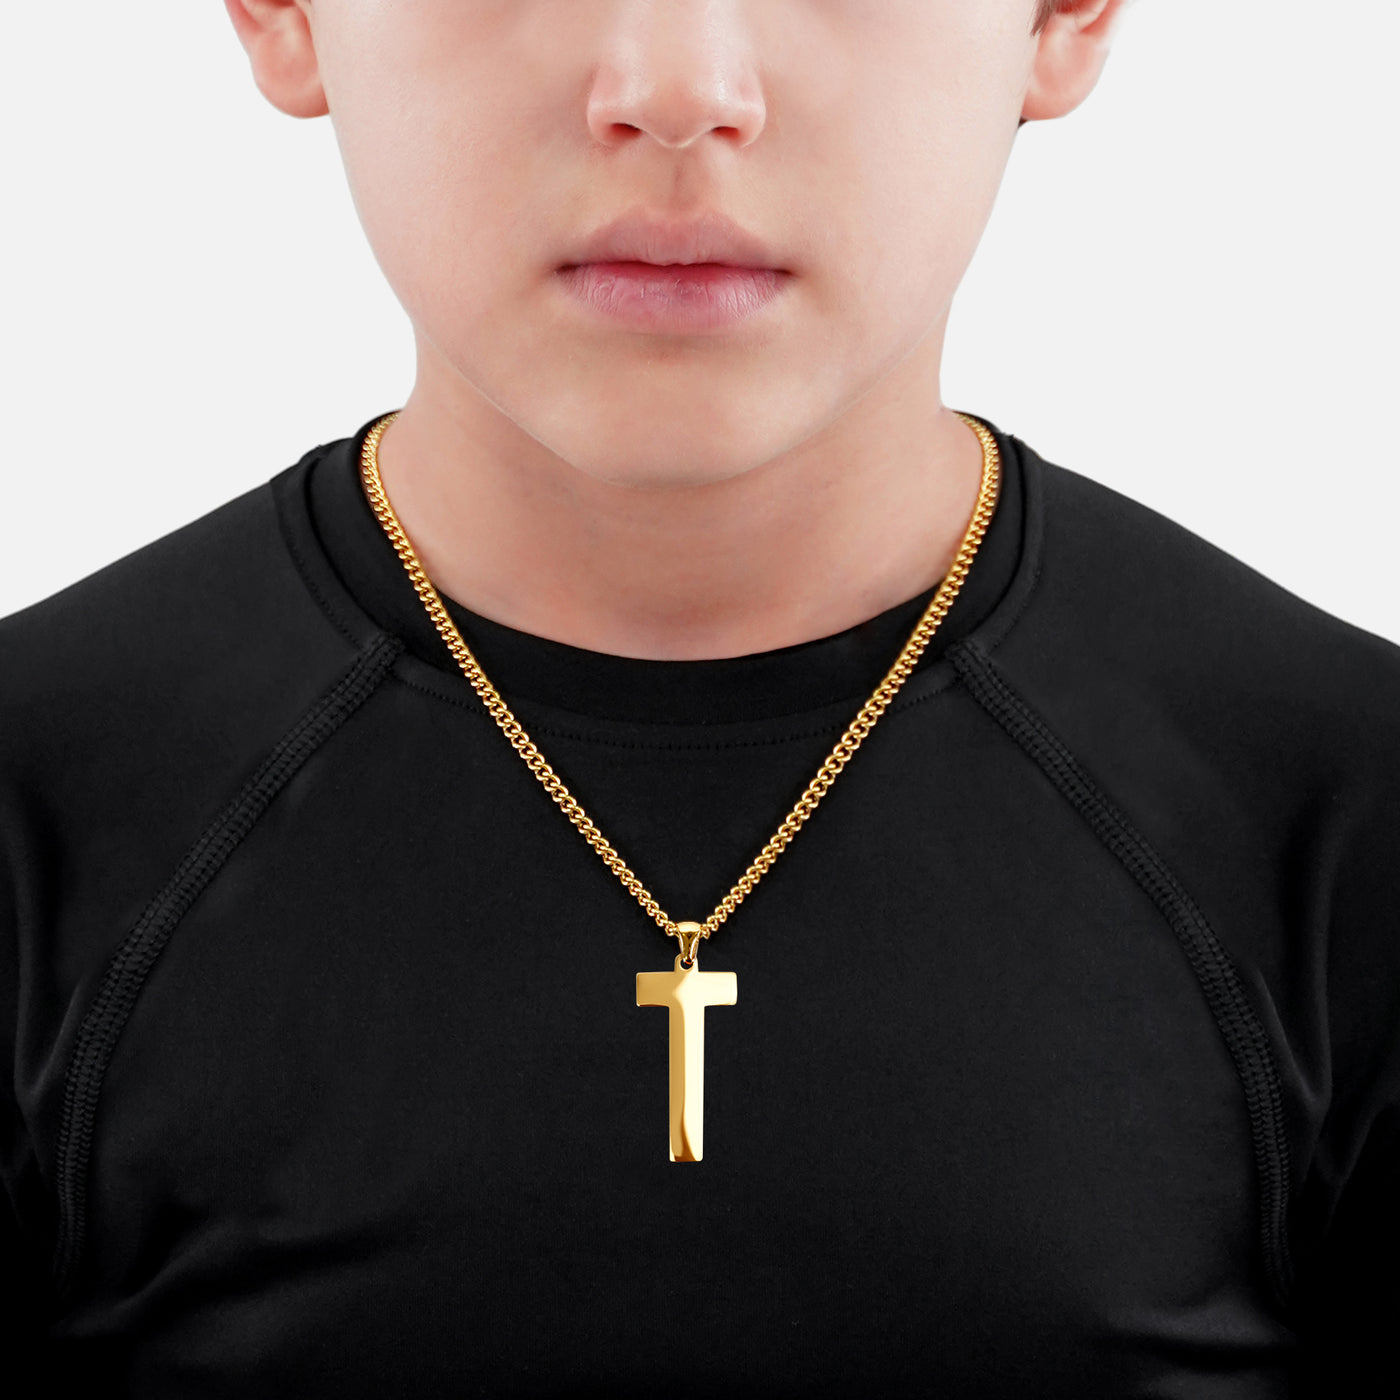 T Letter Pendant with Chain Kids Necklace - Gold Plated Stainless Steel